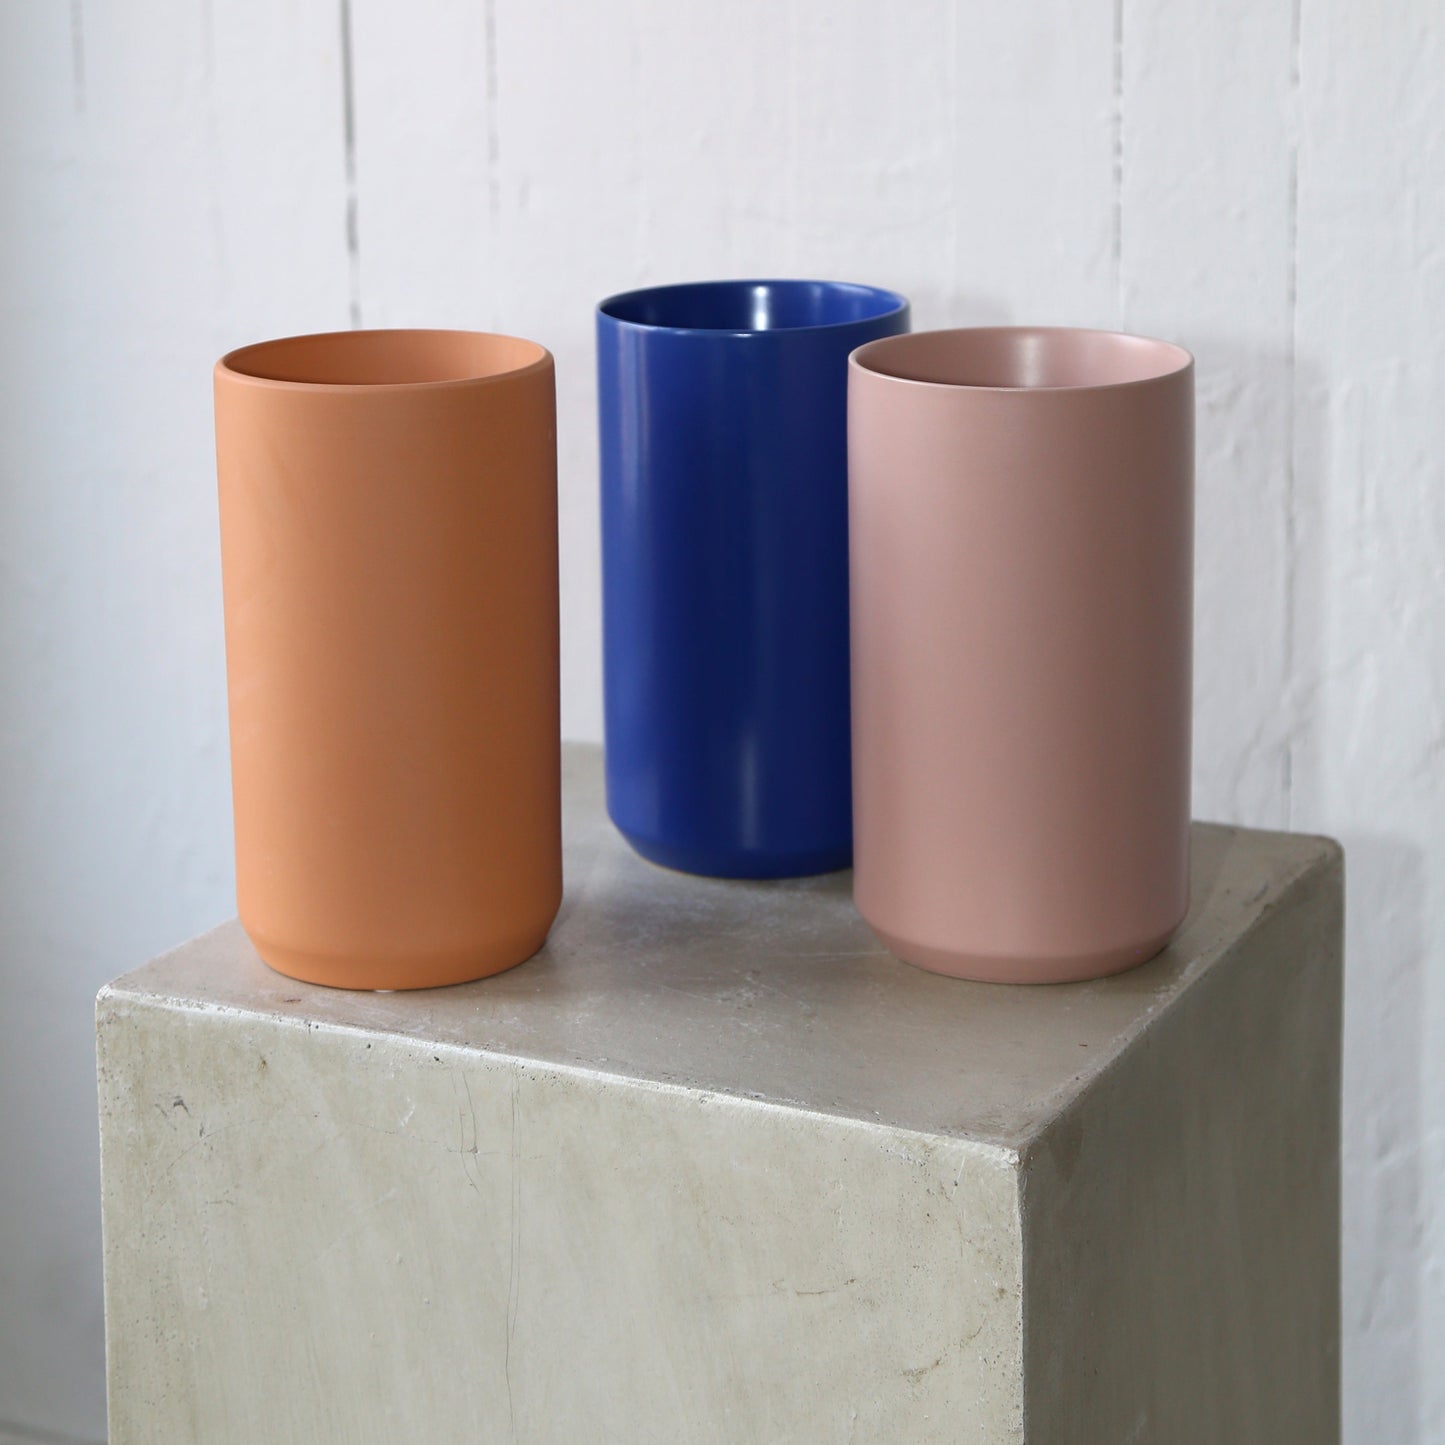 Kendall Vase in Terracotta, Blue and Blush available at Rook & Rose.